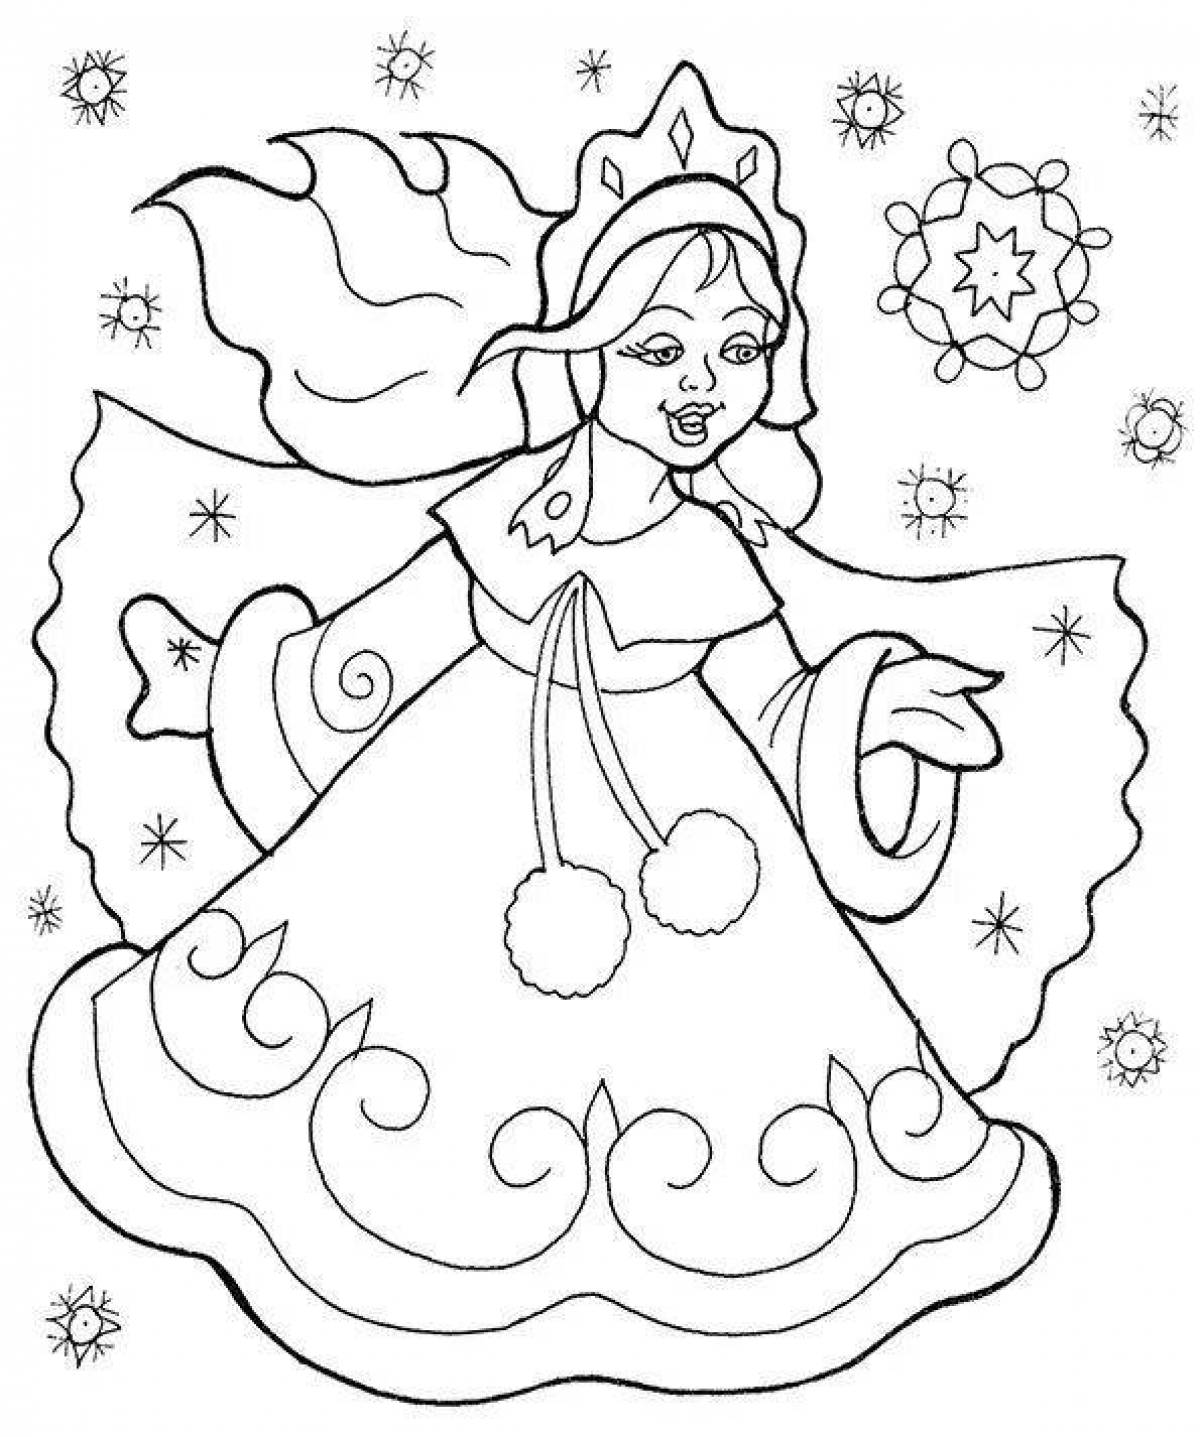 Charming coloring drawing of a snow maiden